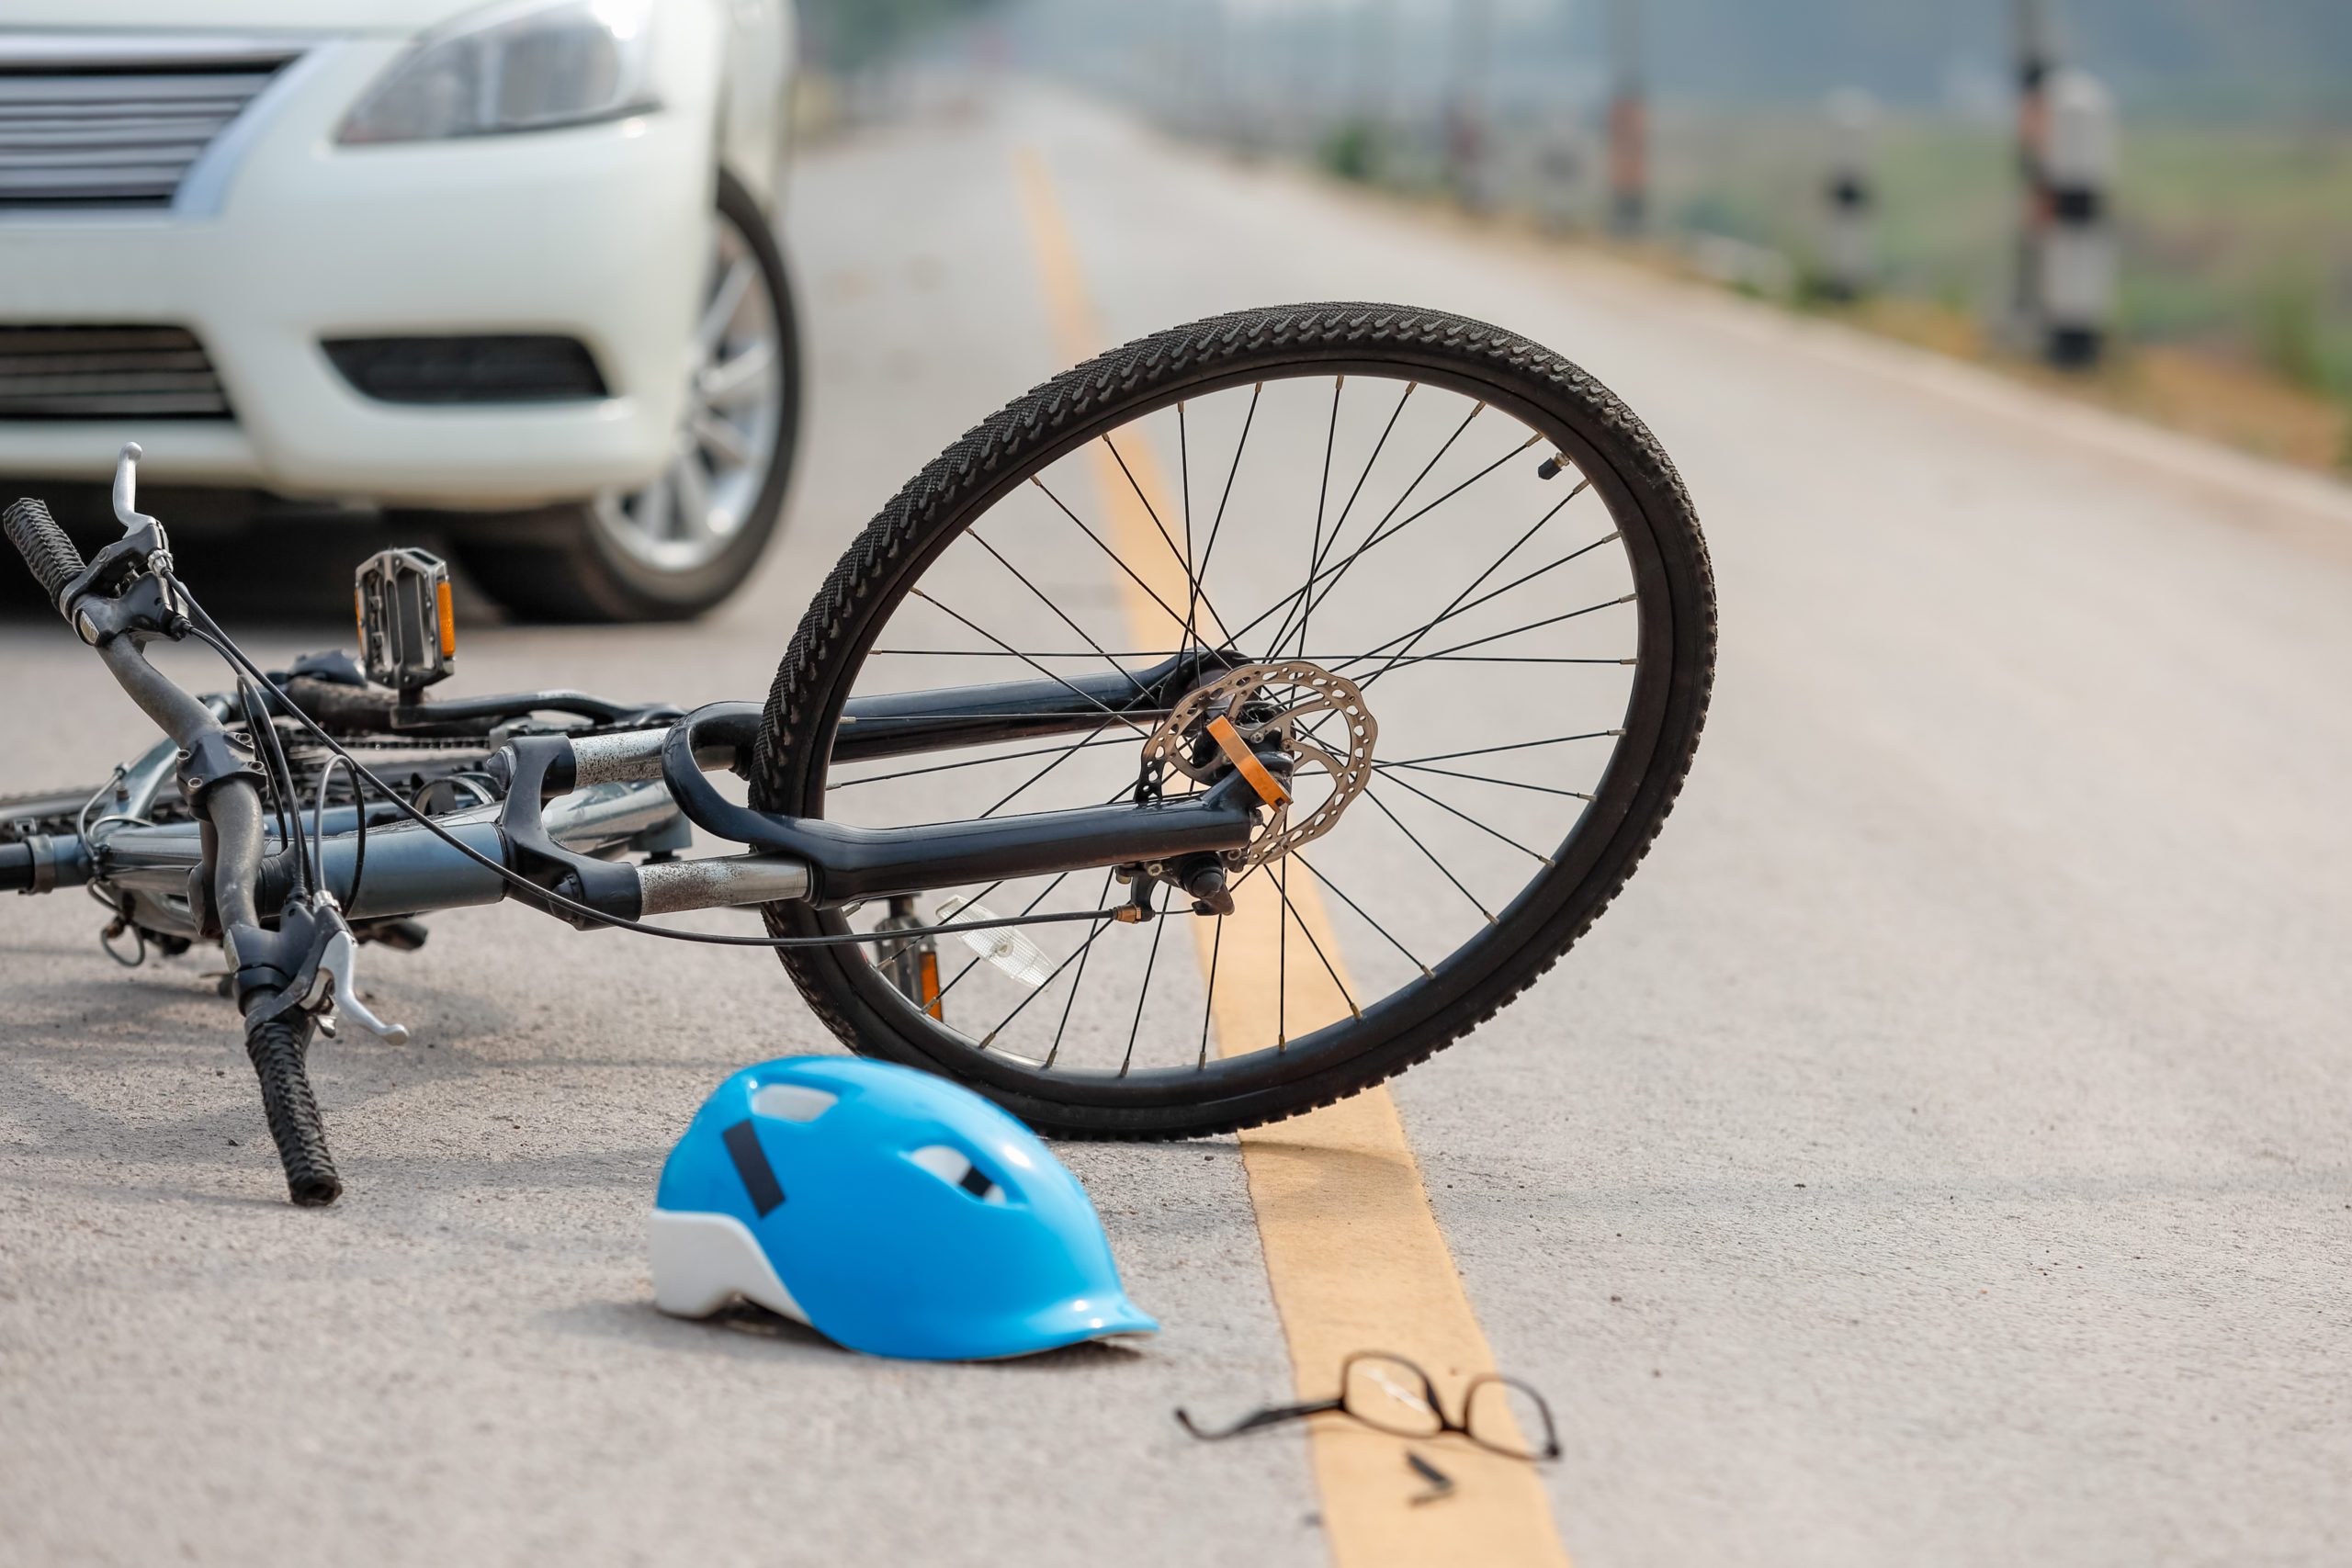 Filing an Injury Claim After a Bicycle Crash